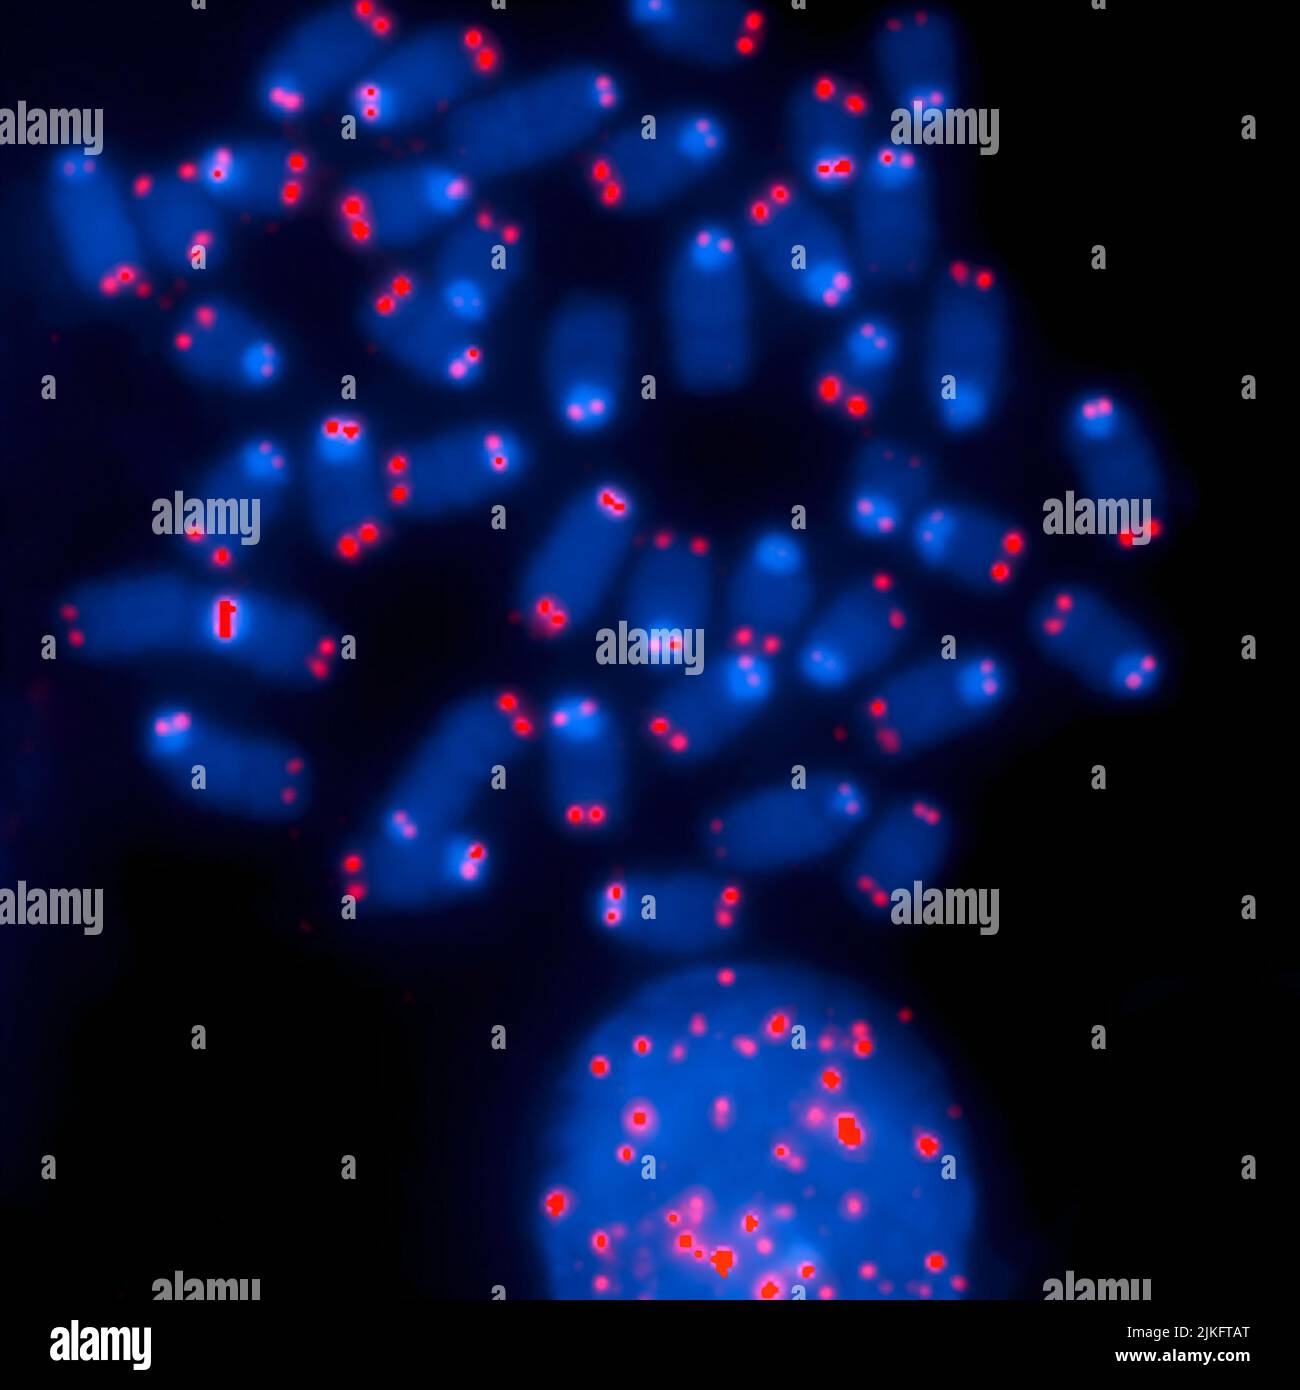 The supplied chromosomes are protected by specific DNA sequences called telomeres, shown here in red. This image shows that some chromosomes lack telomeres, which can lead to abnormal cell division and cancer. Stock Photo